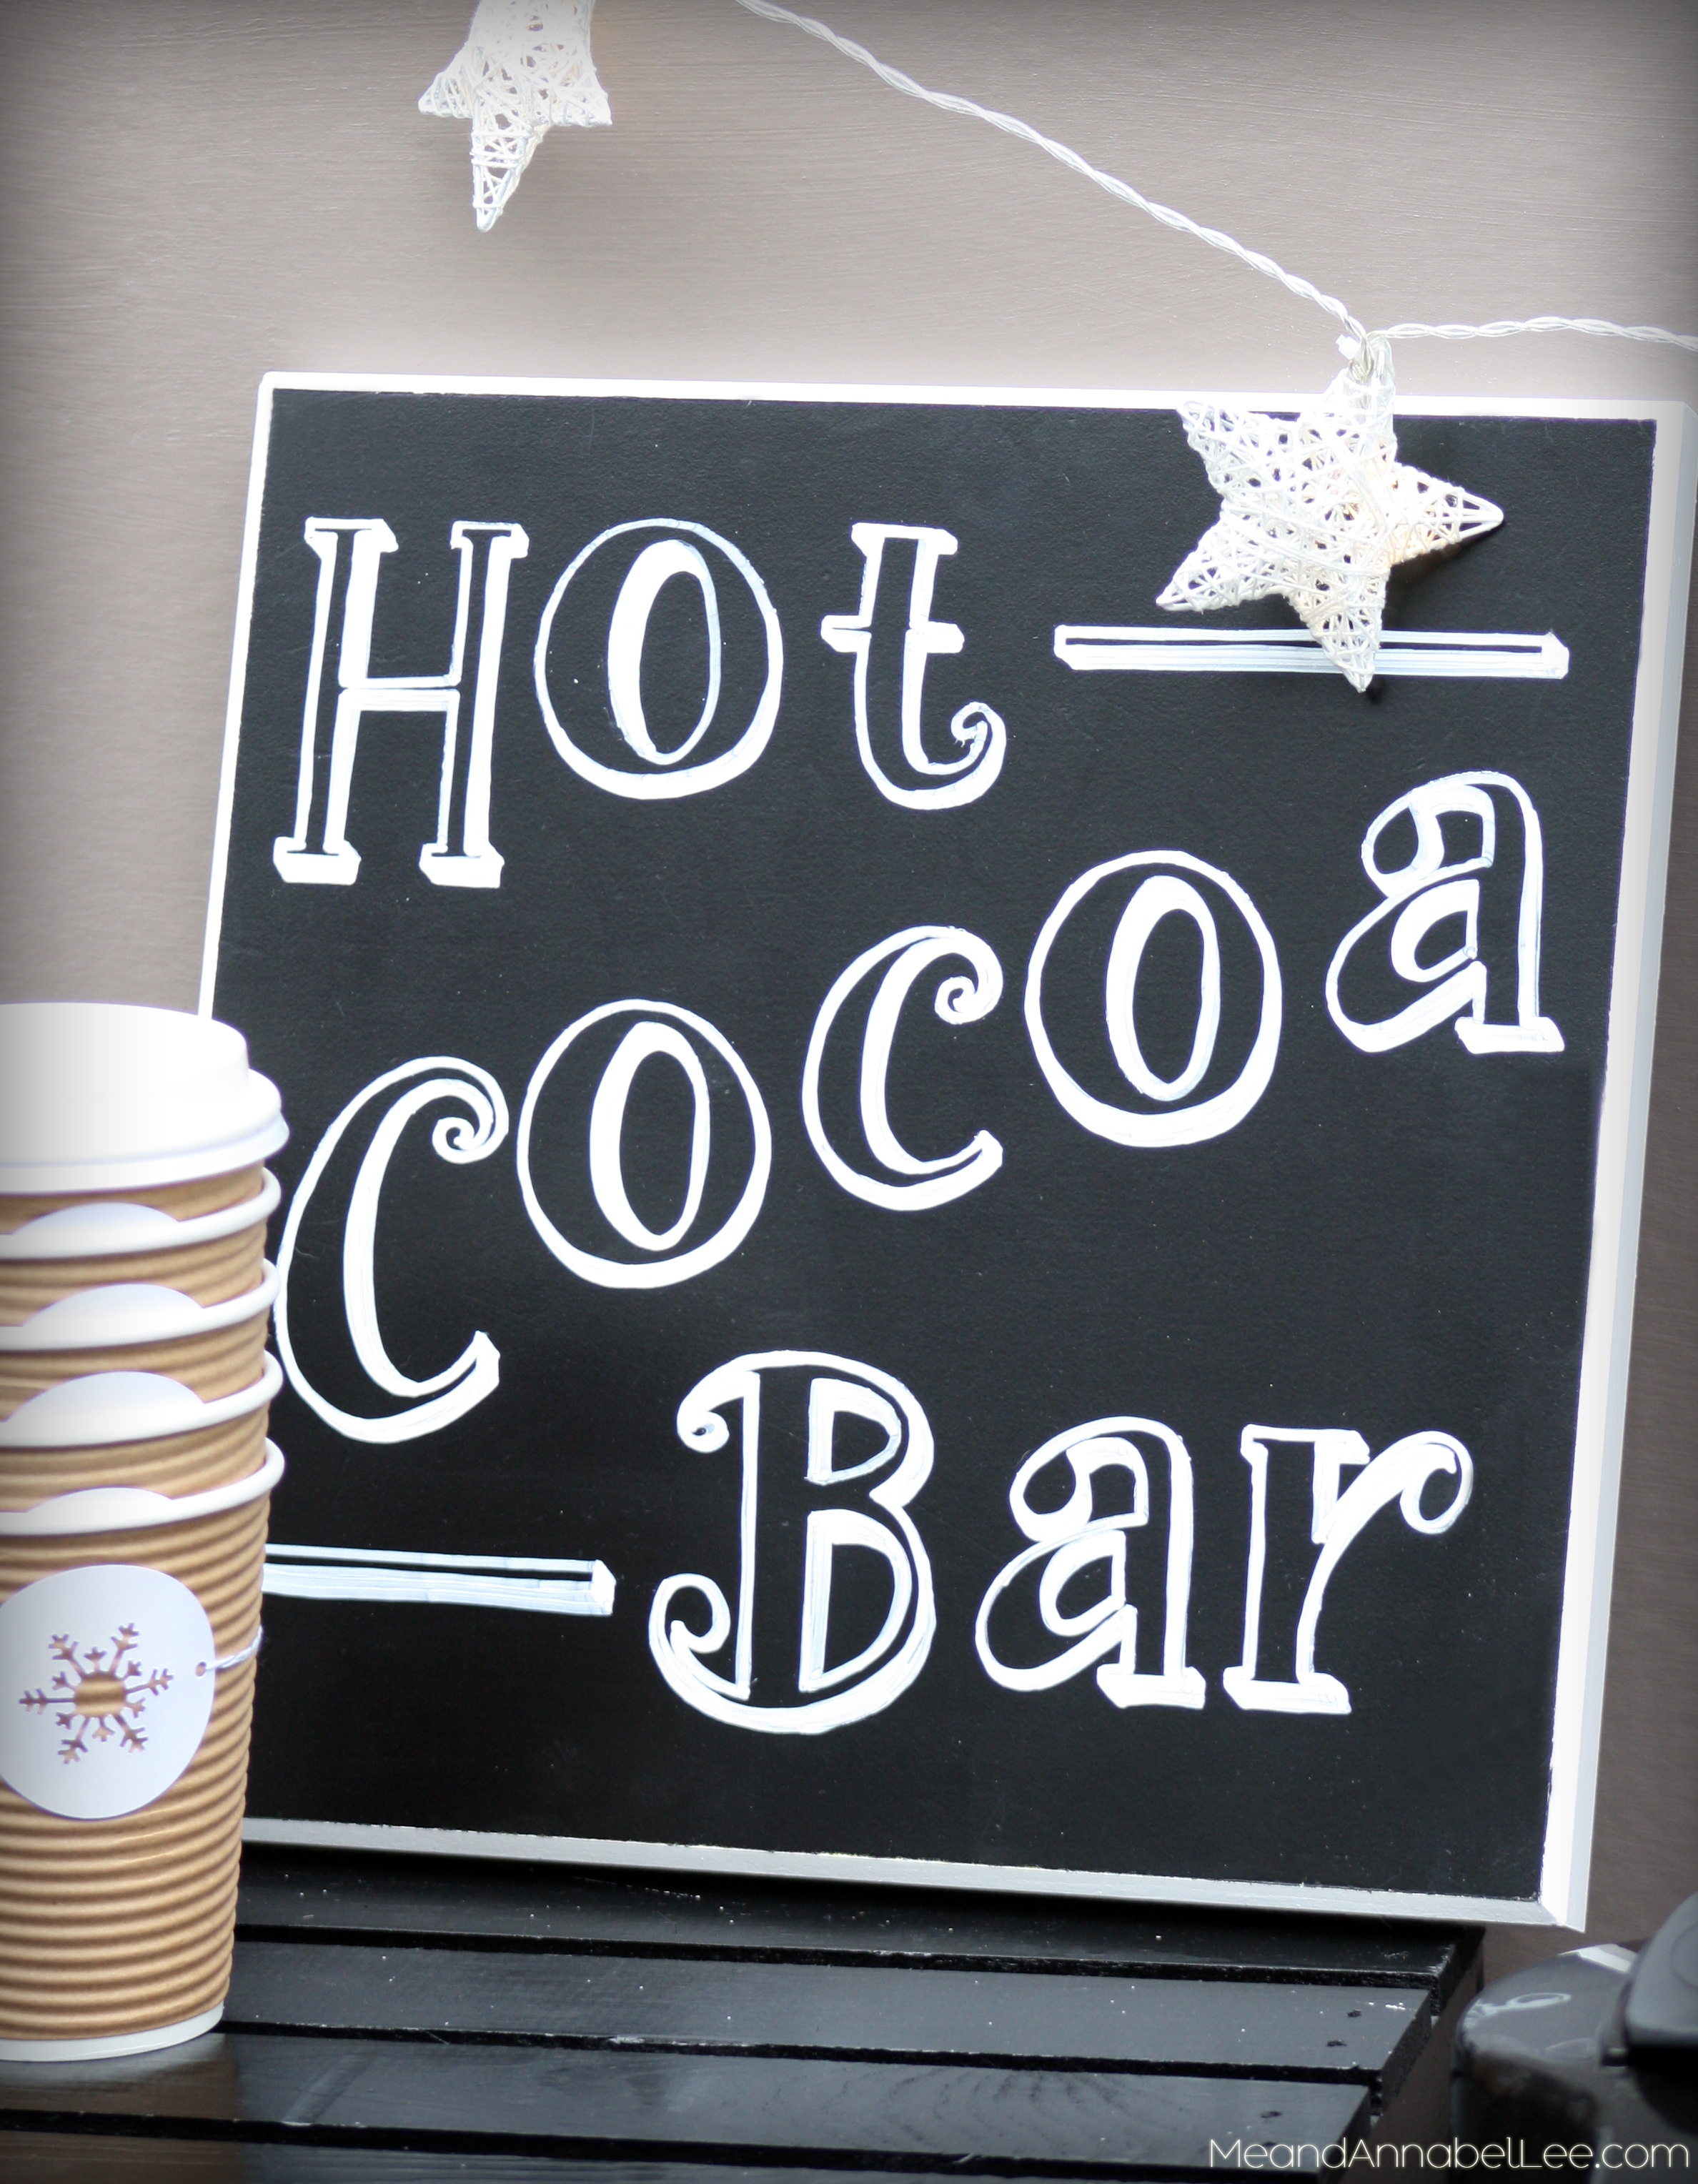 Winter Hot Cocoa Bar / Hot Chocolate Bar - All of the DIY instructions and tips for putting together your own Hot Cocoa Bar - www.MeandAnnabelLee.com